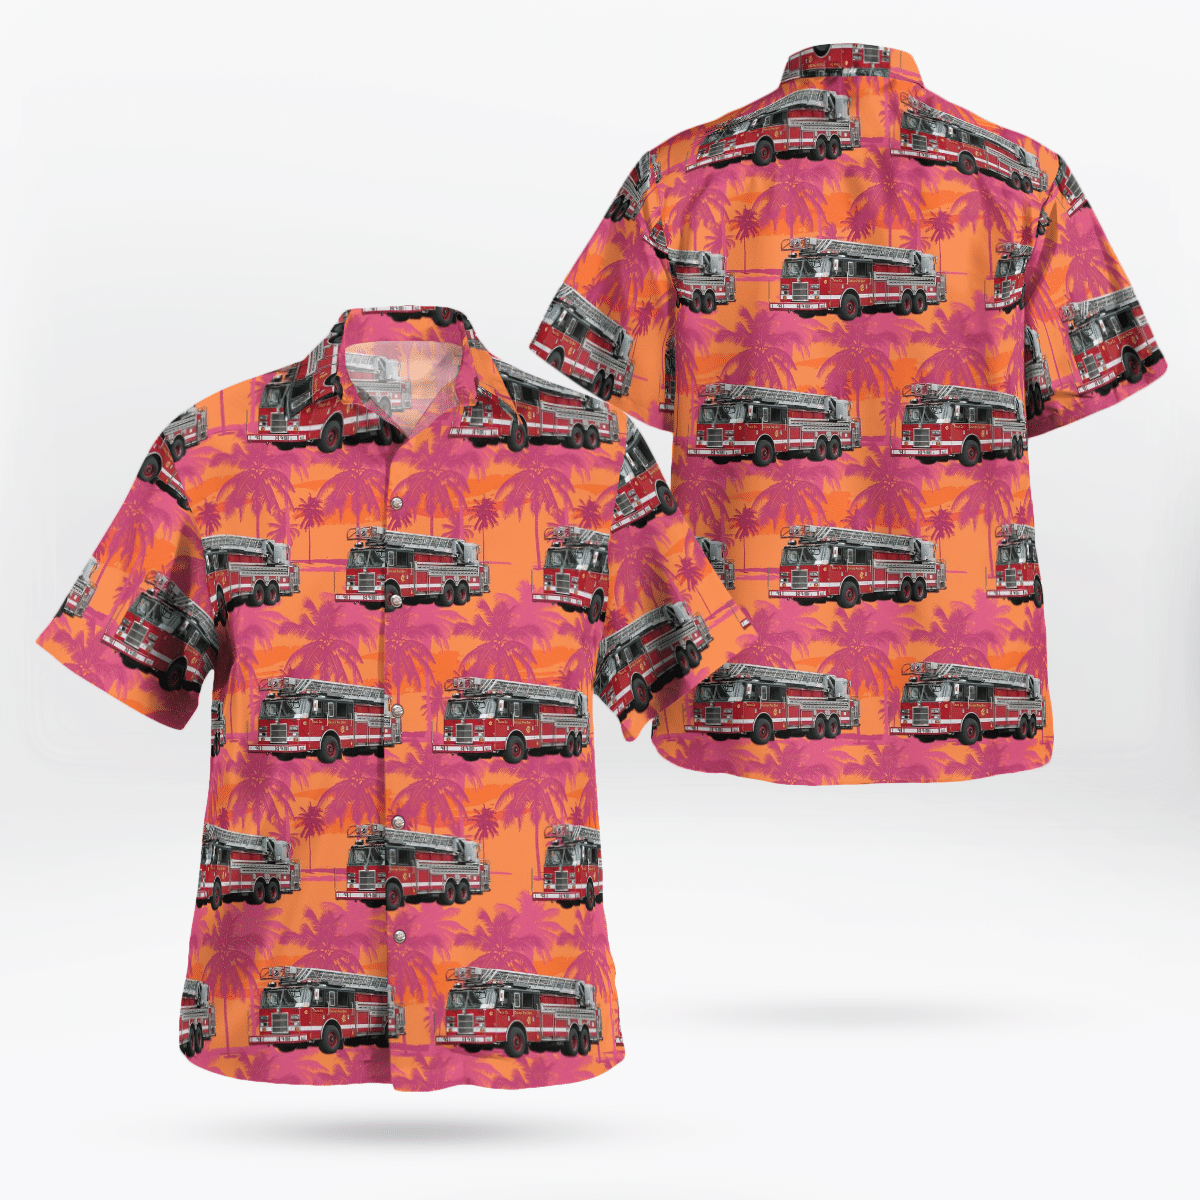 If you are in need of a new summertime look, pick up this Hawaiian shirt 49